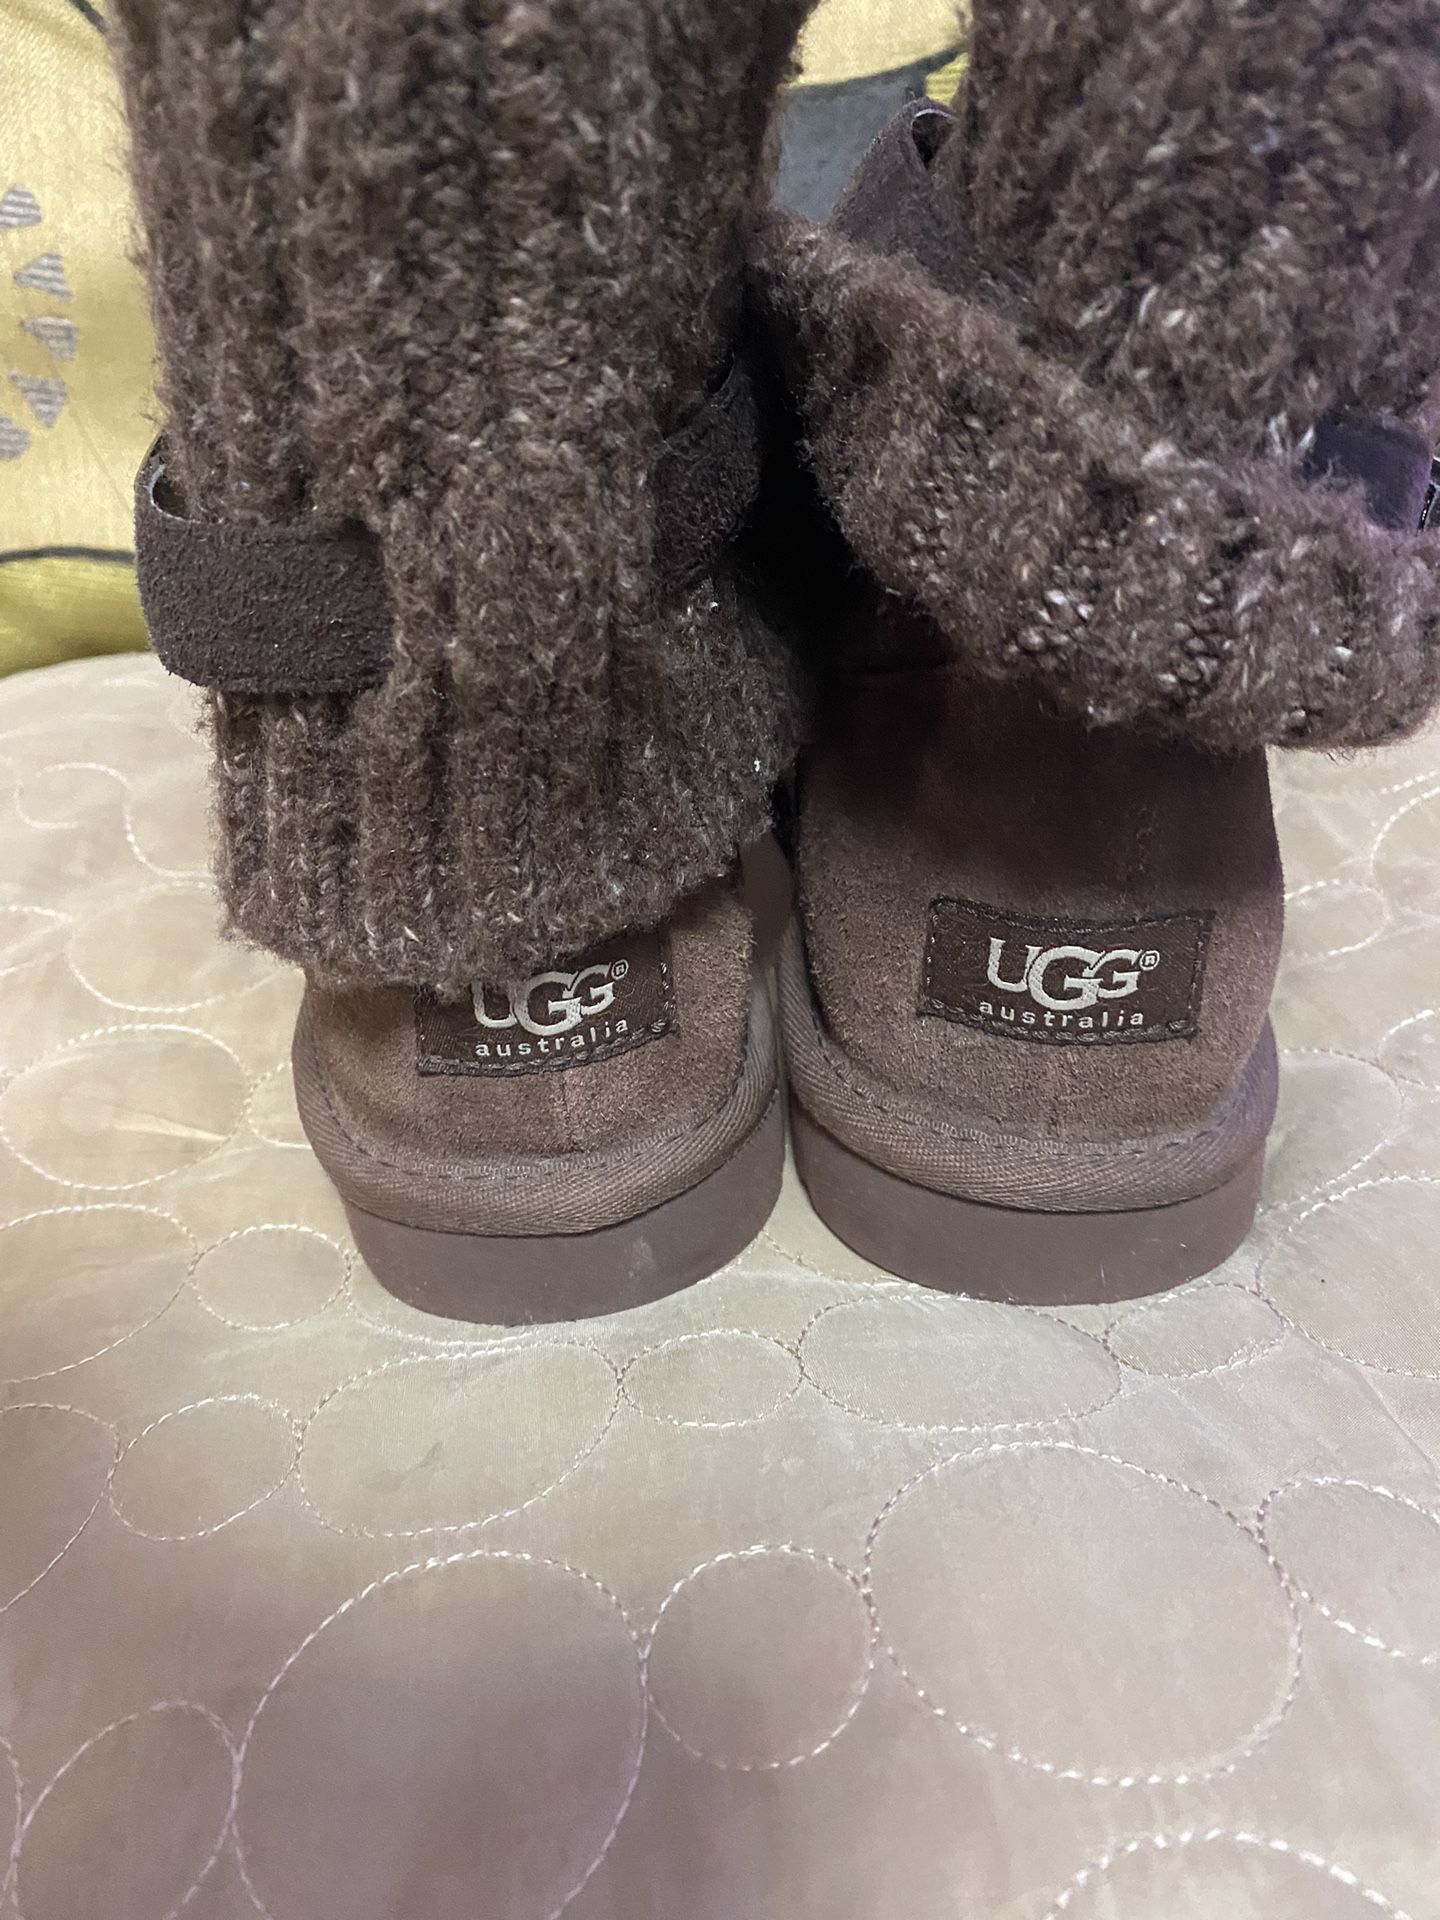 Ugg Boots  Size 8